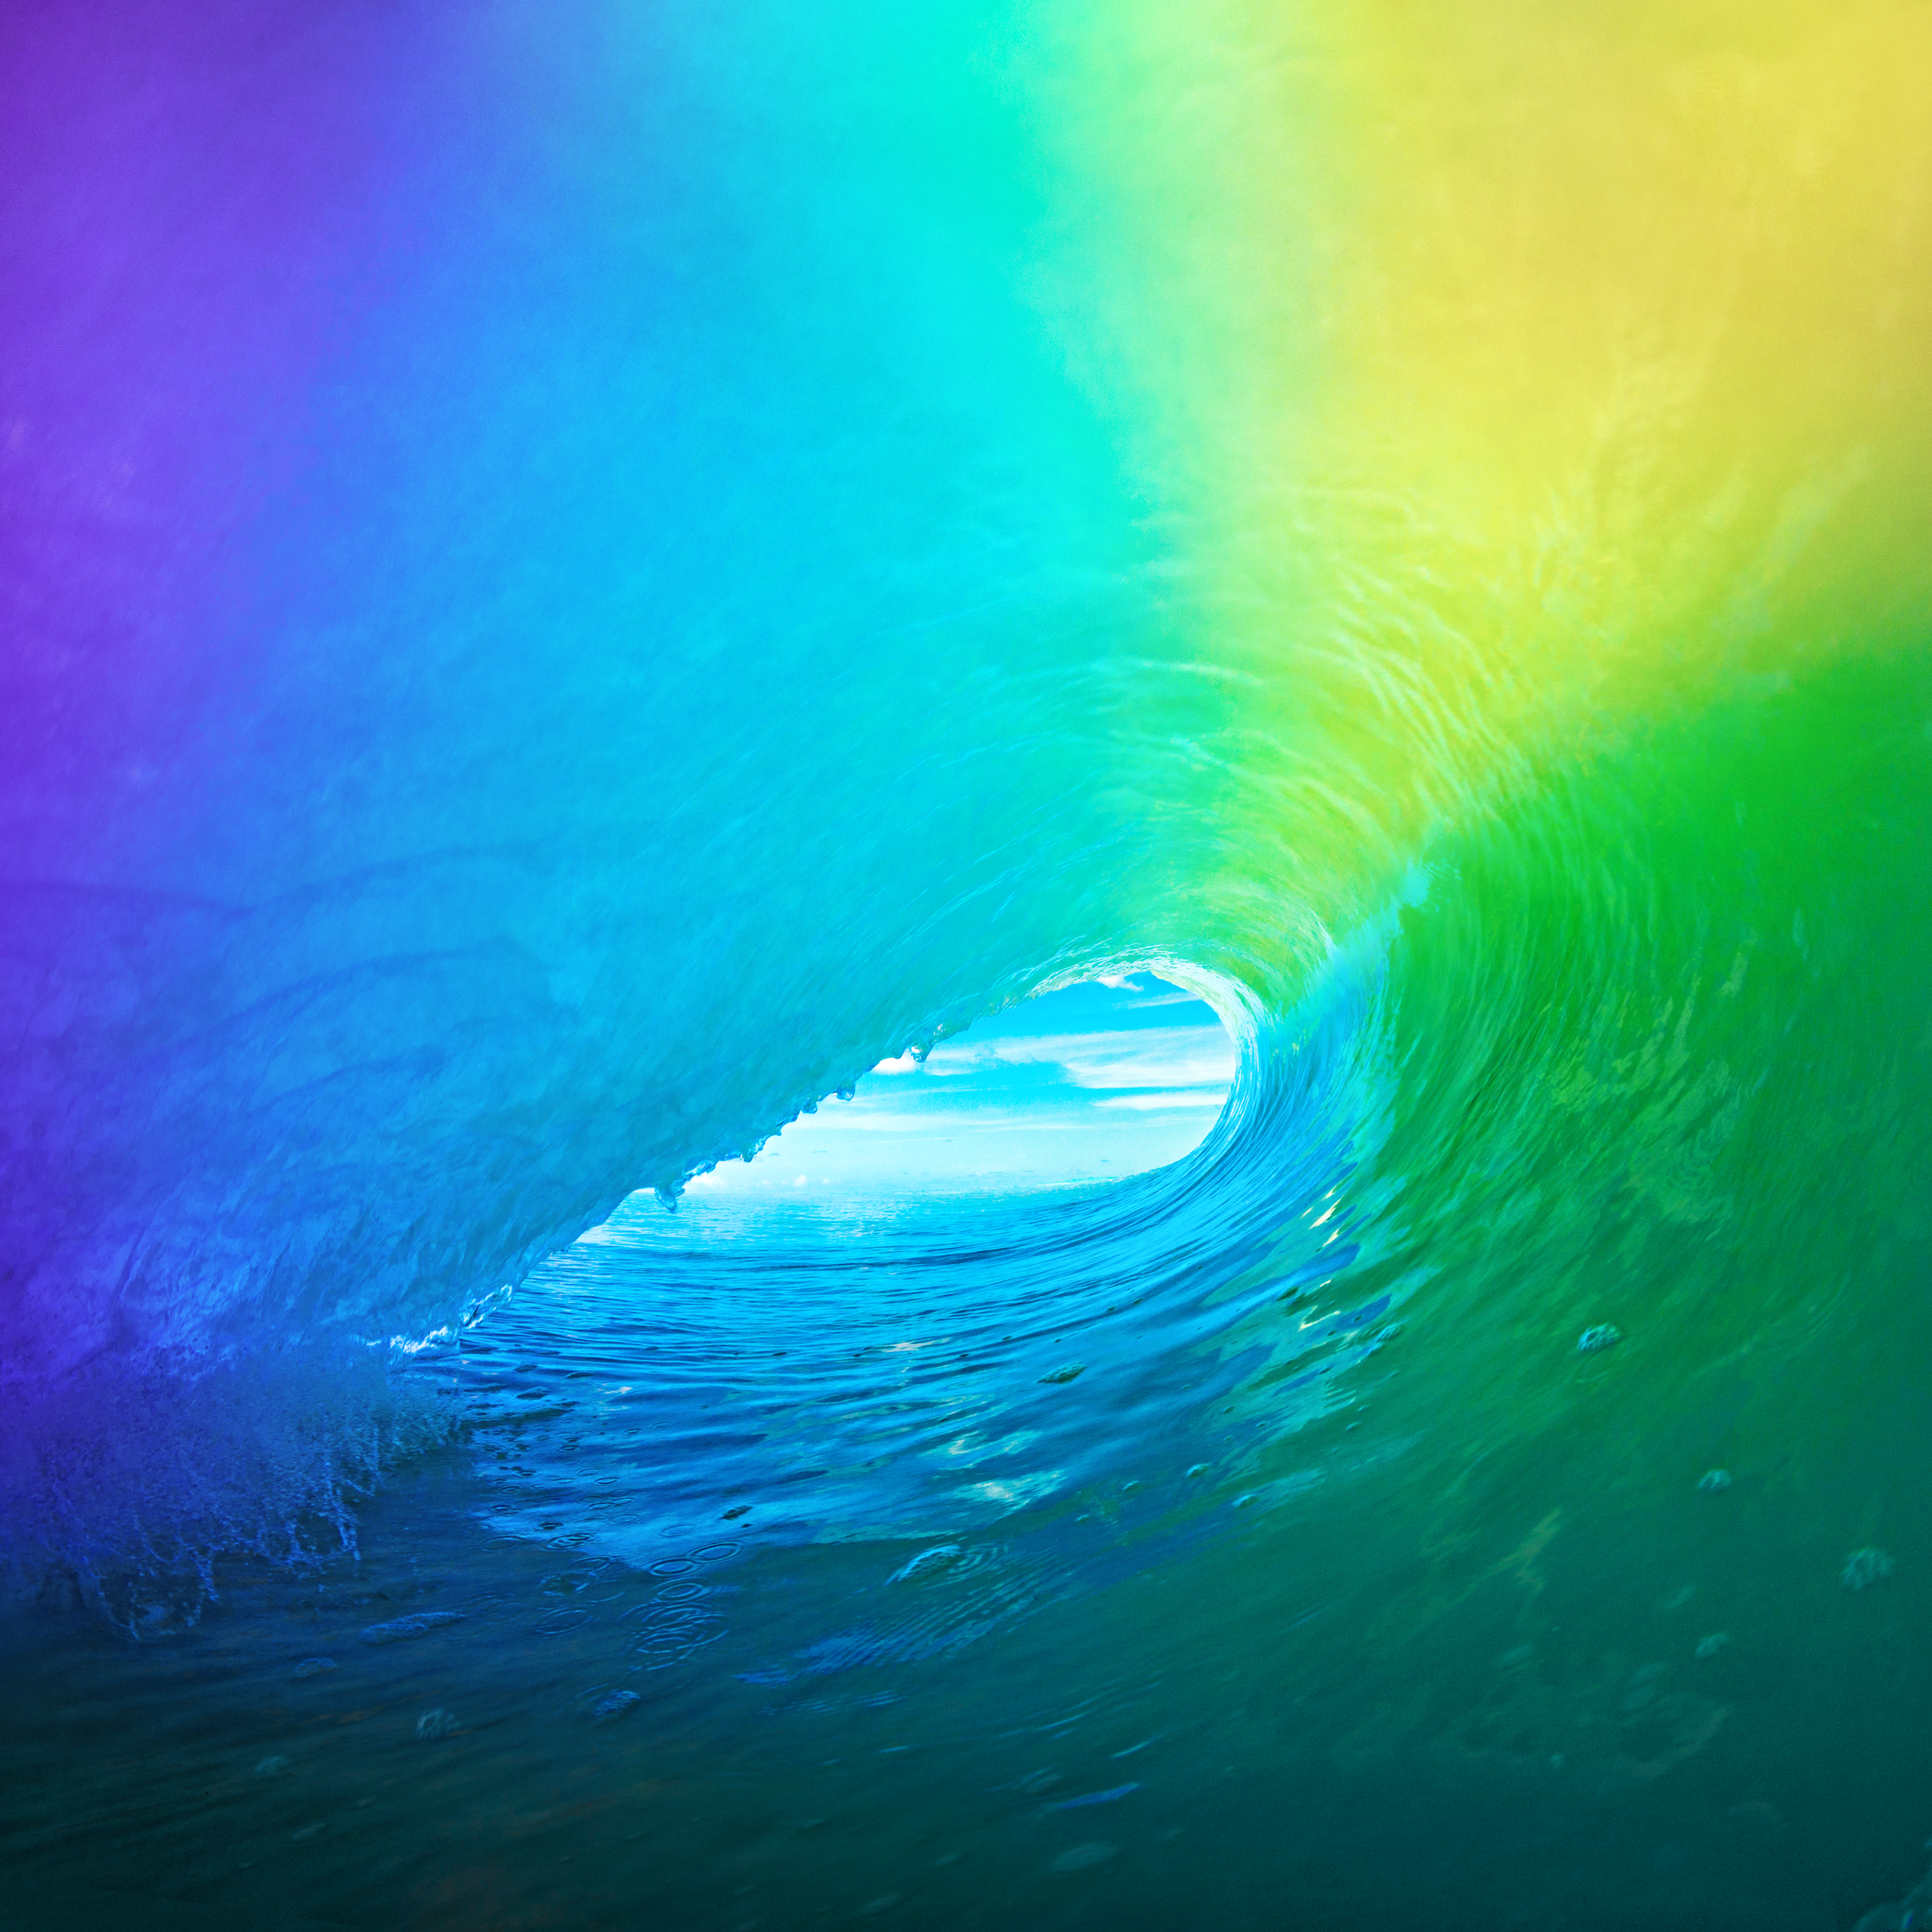 Apple Removes The Default Original iOS 9 Wallpaper, But You Can ...